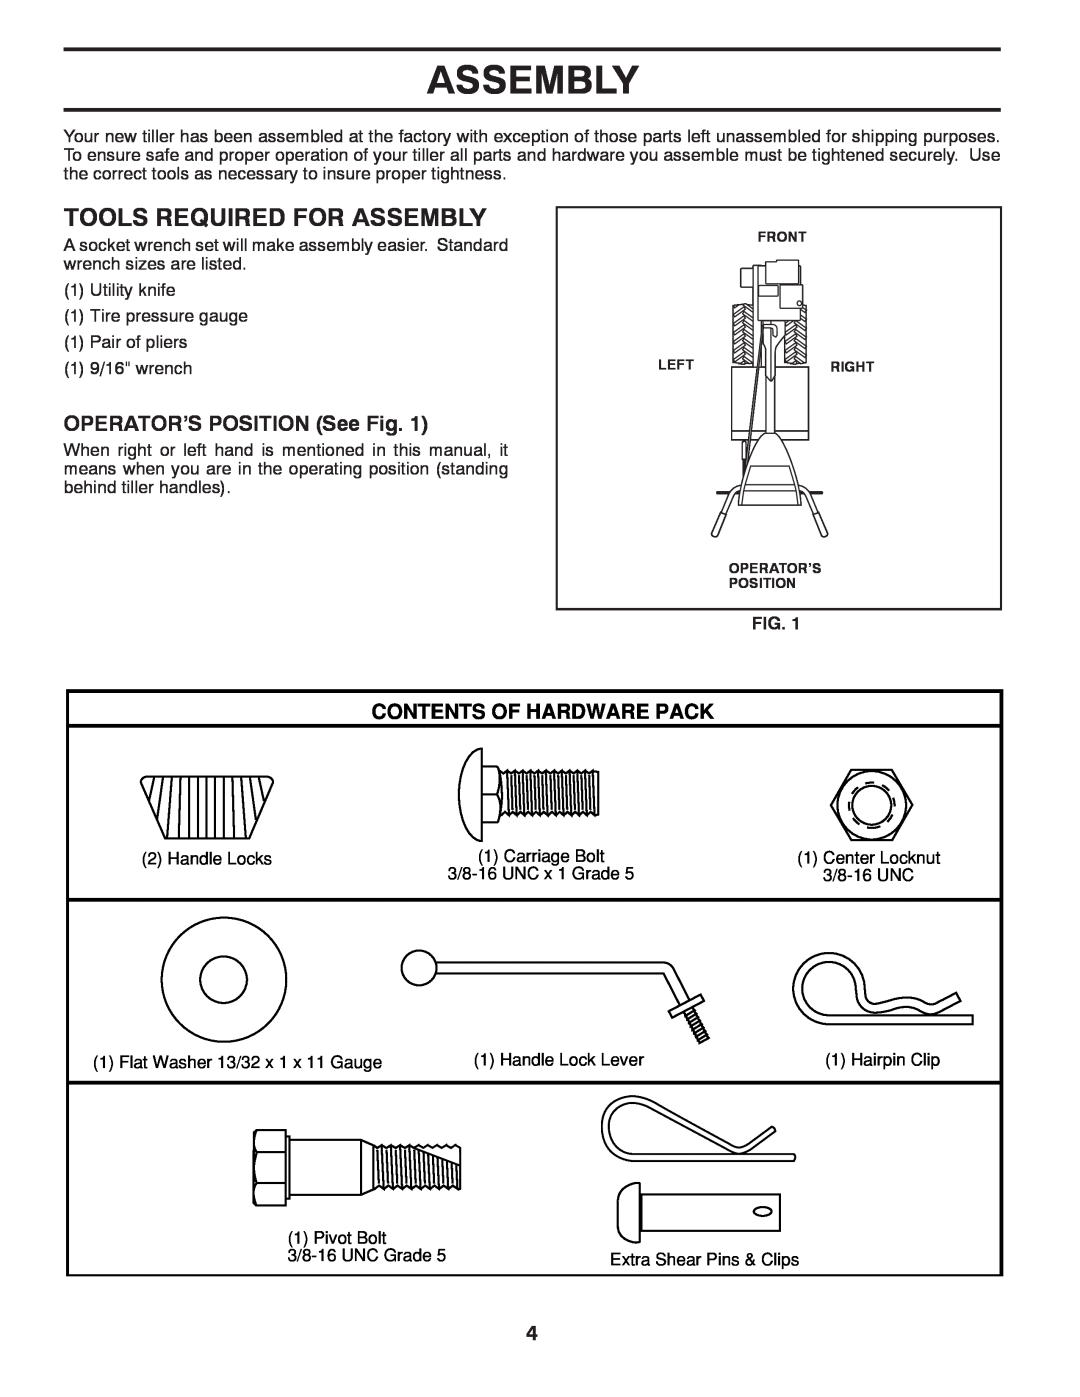 Poulan PRRT850 manual Tools Required For Assembly, OPERATOR’S POSITION See Fig, Contents Of Hardware Pack 